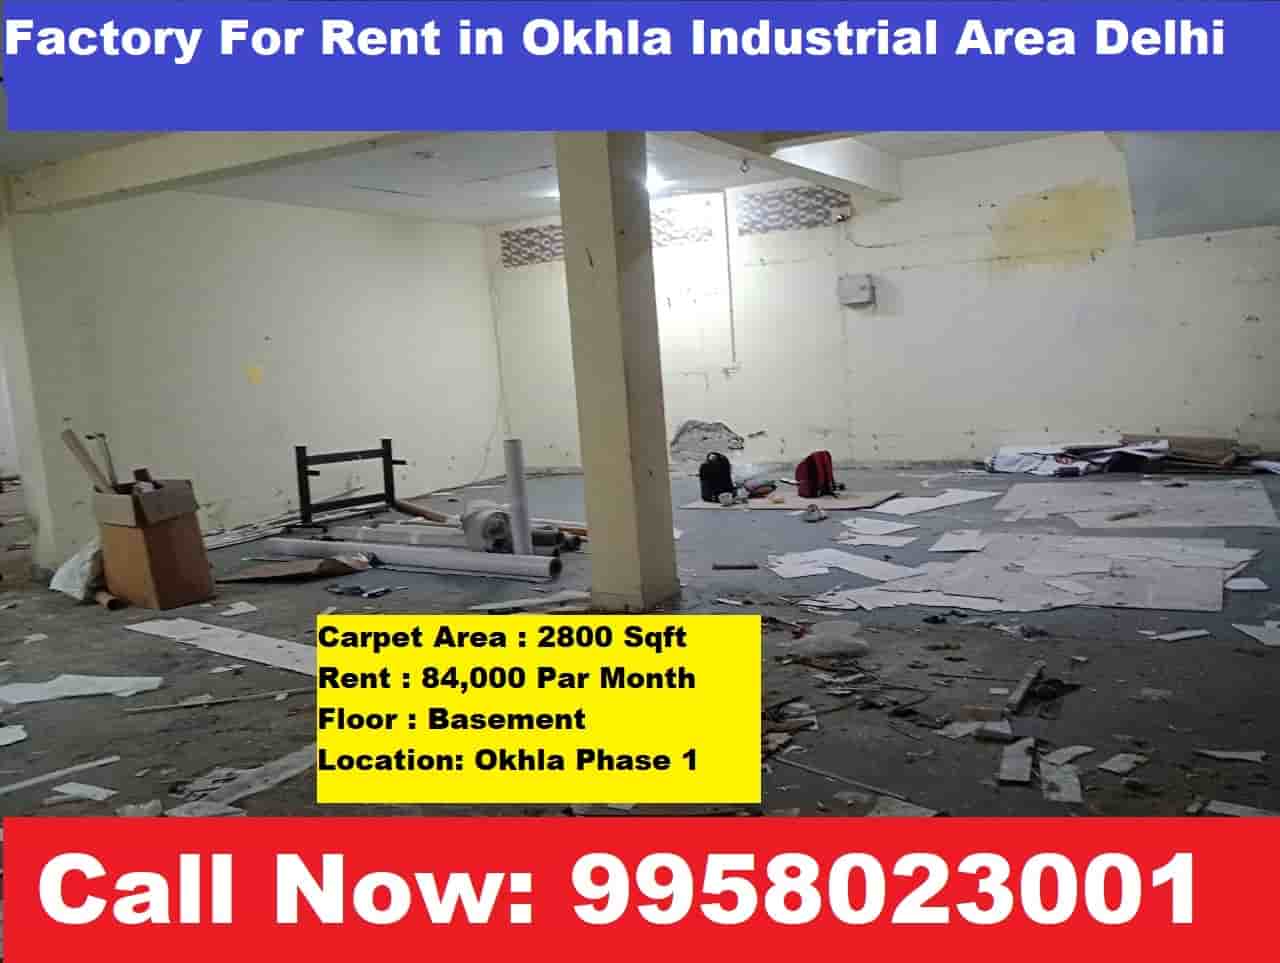 Factory For Rent in Okhla Industrial Area Delhi